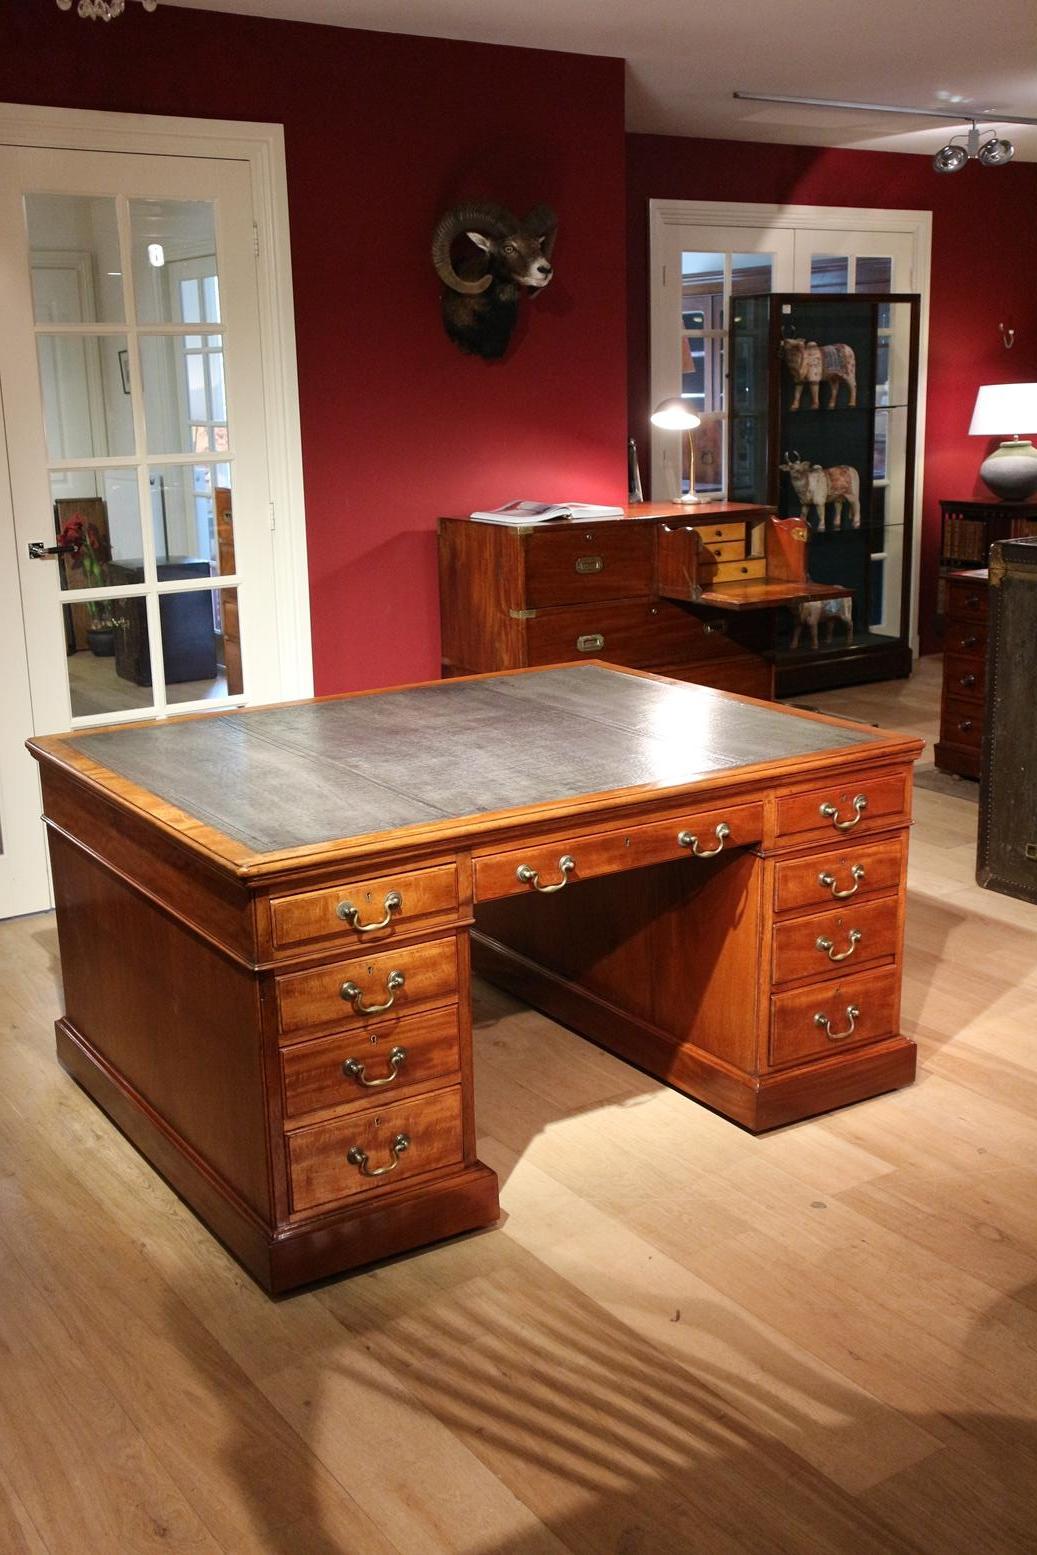 Impressive mahogany partner desk. 18 drawers. Due to the depth of 122cm it is very convenient to work with two persons. The fact that the desk has drawers on both sides is not only beautiful to see but also practical. Desk is in perfect condition.